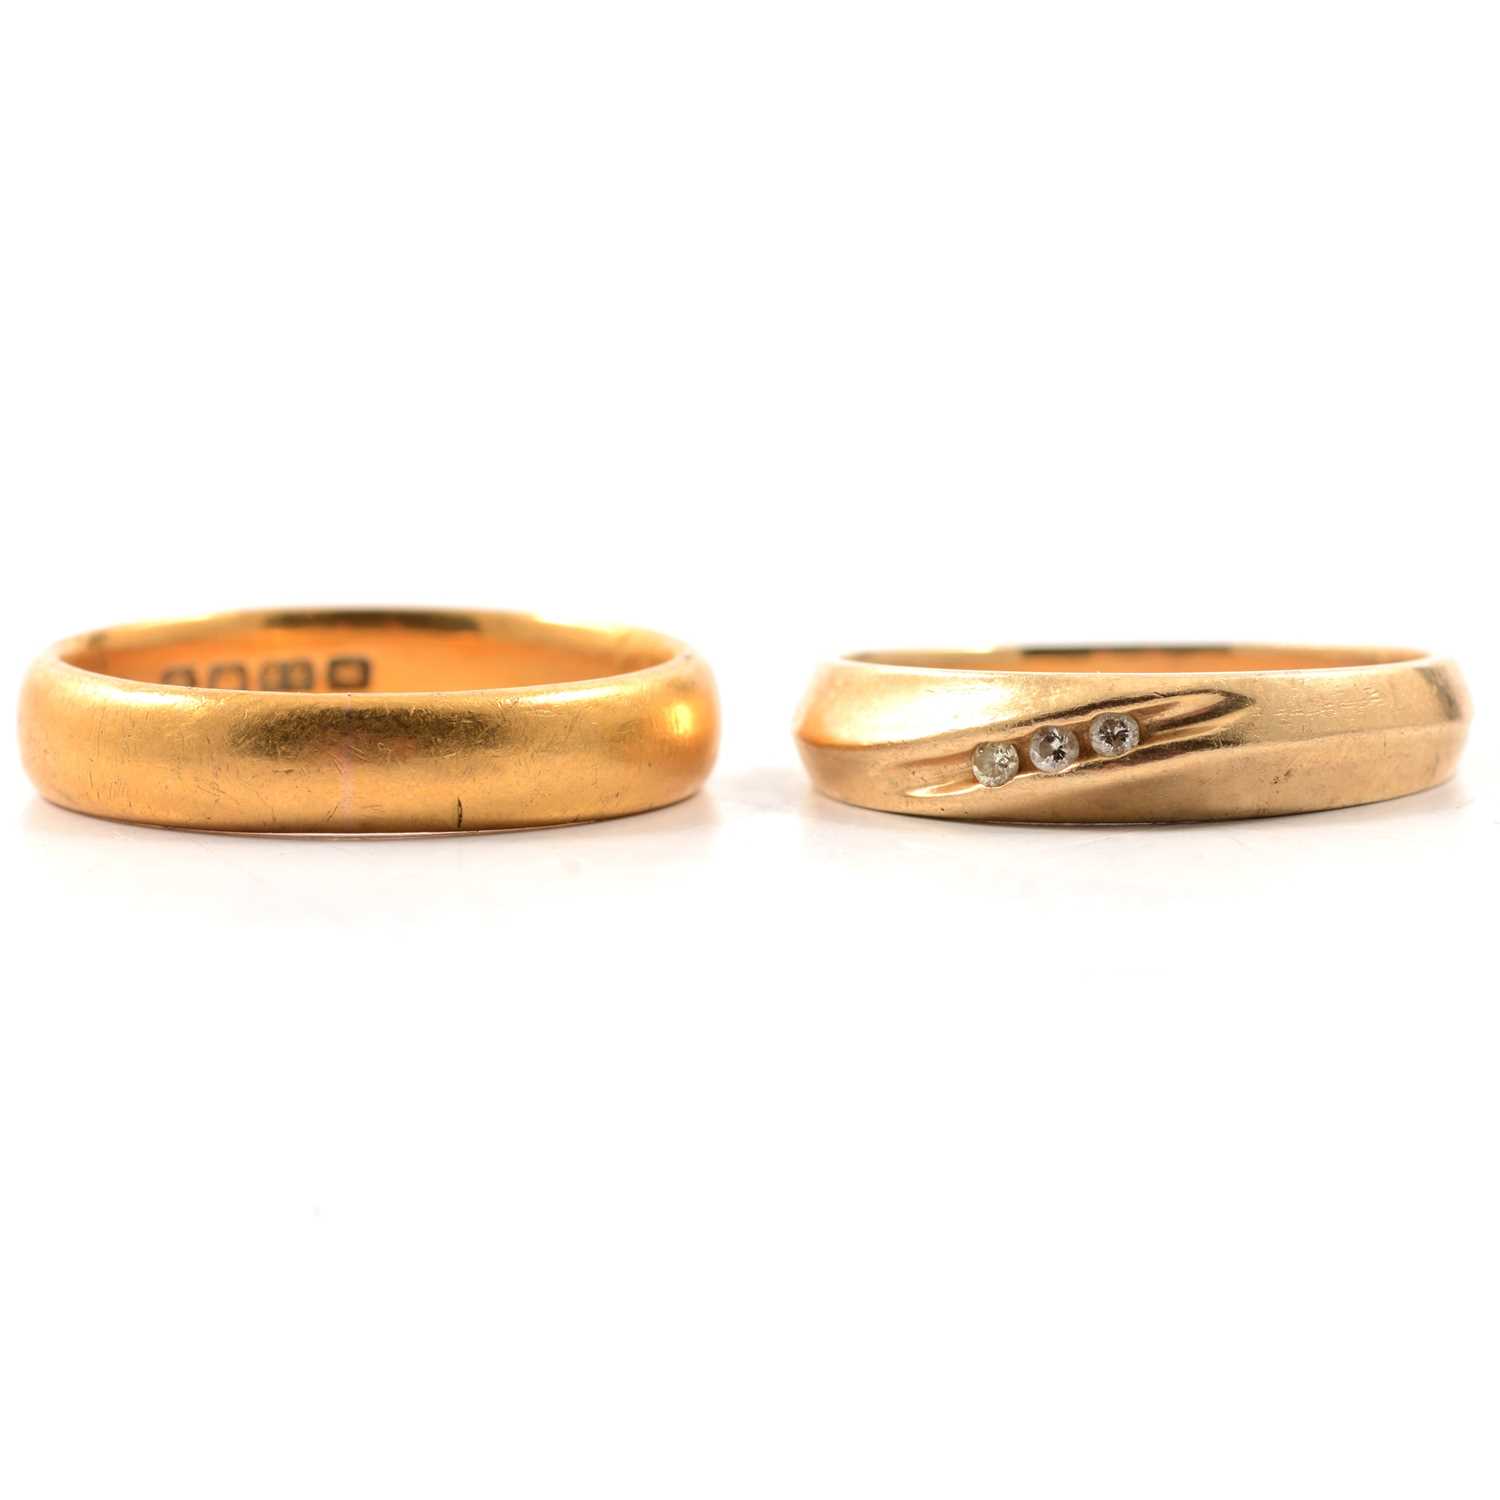 Lot 83 - A 22 carat gold wedding band and 10K ring.